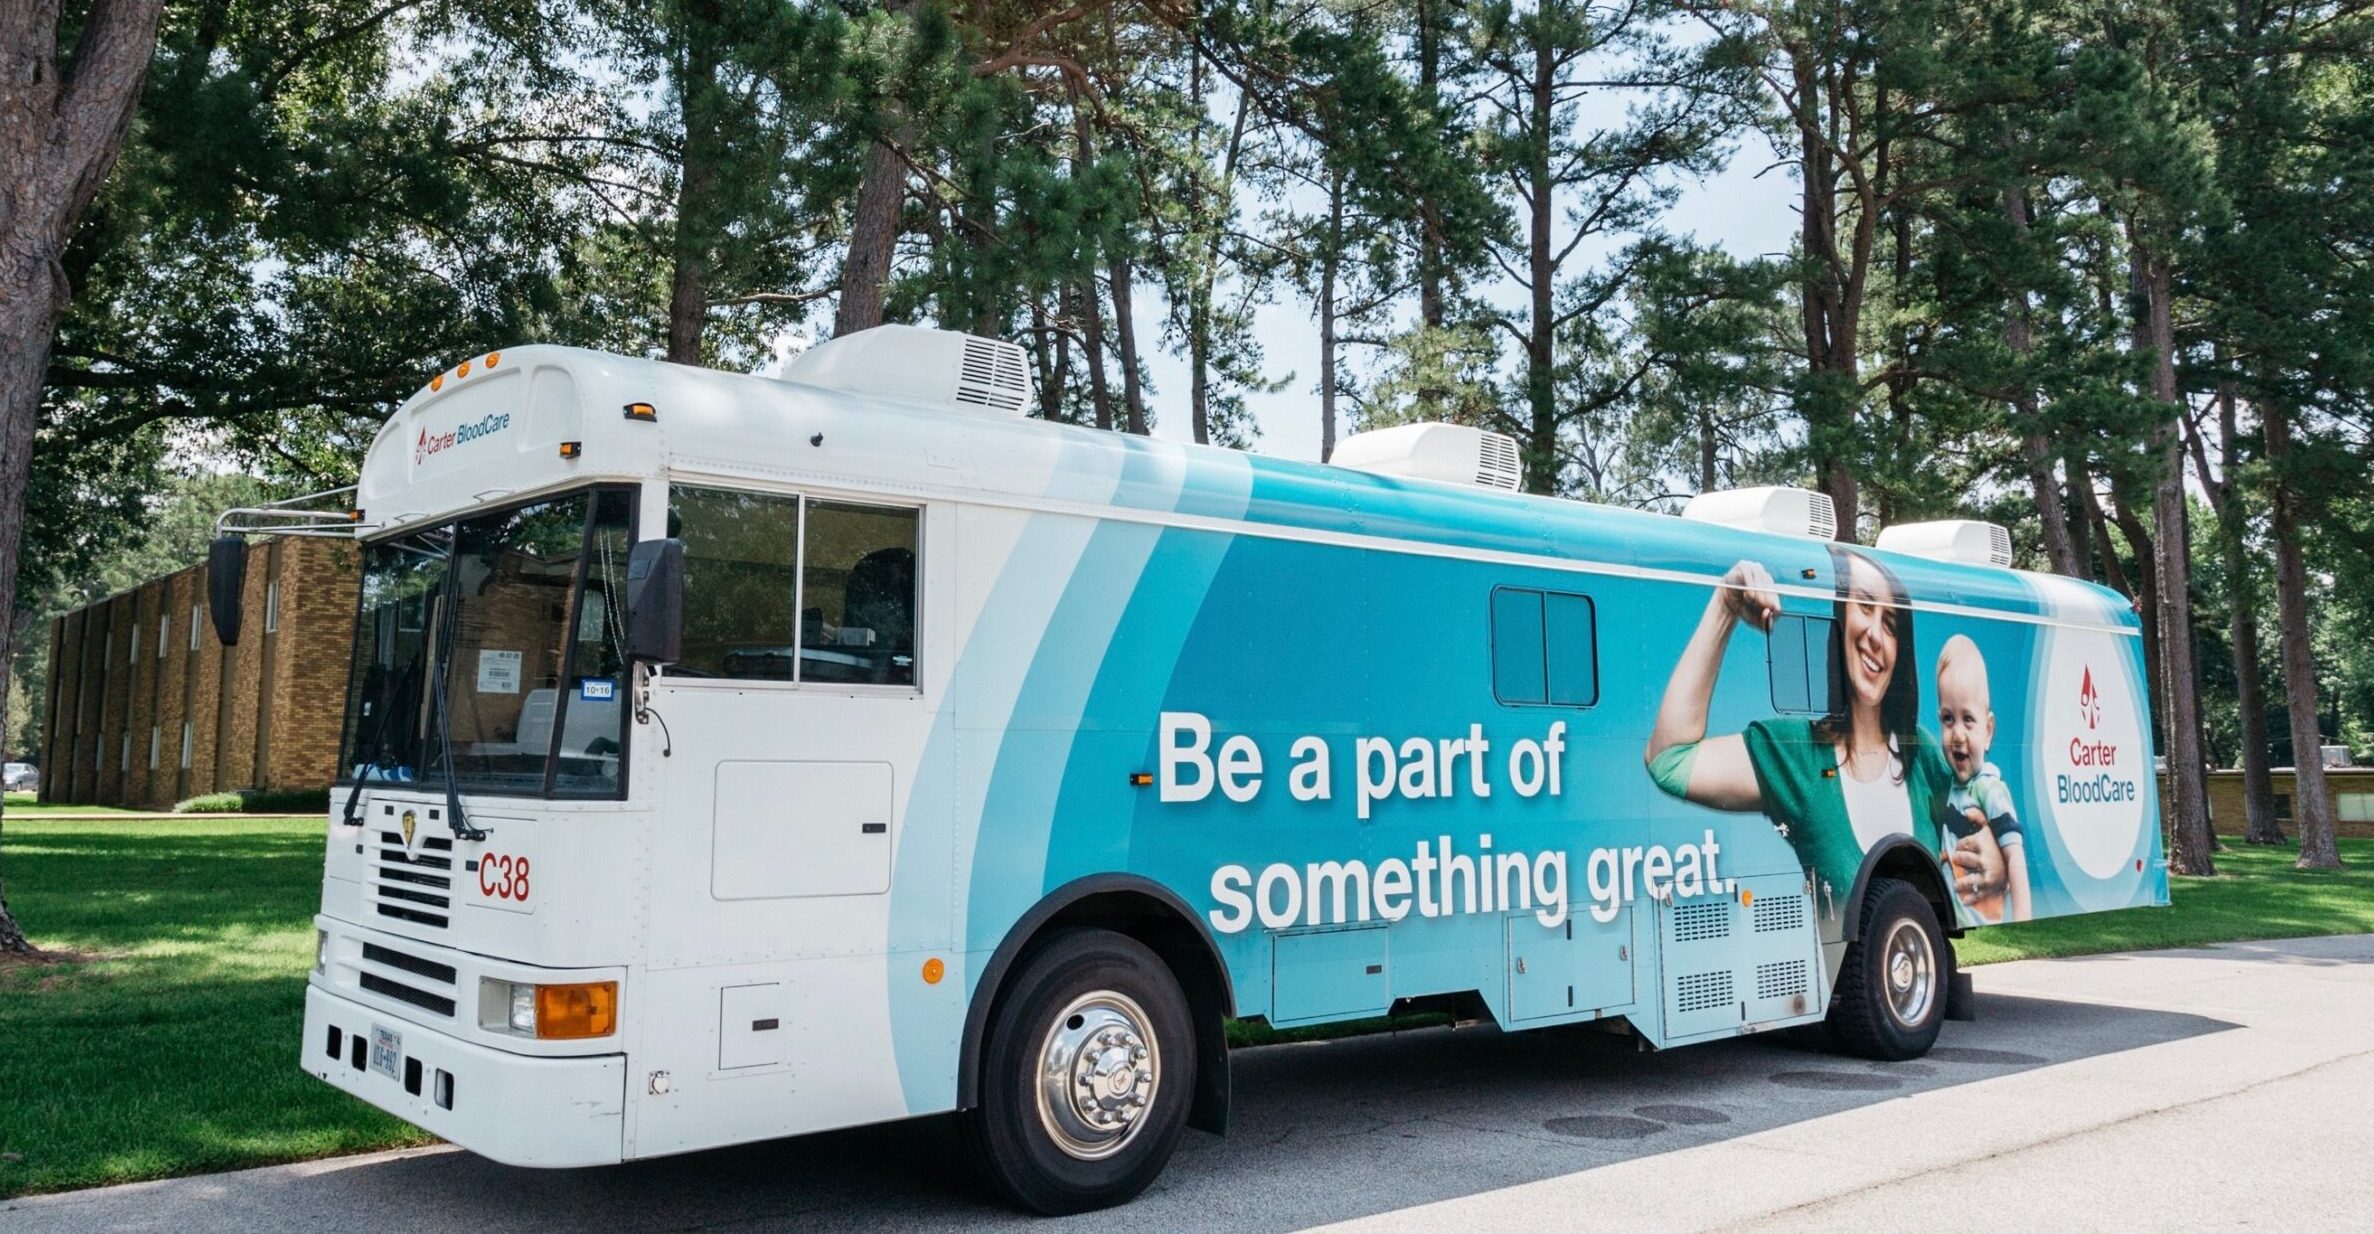 Carter Bloodcare bus for mobile blood donation